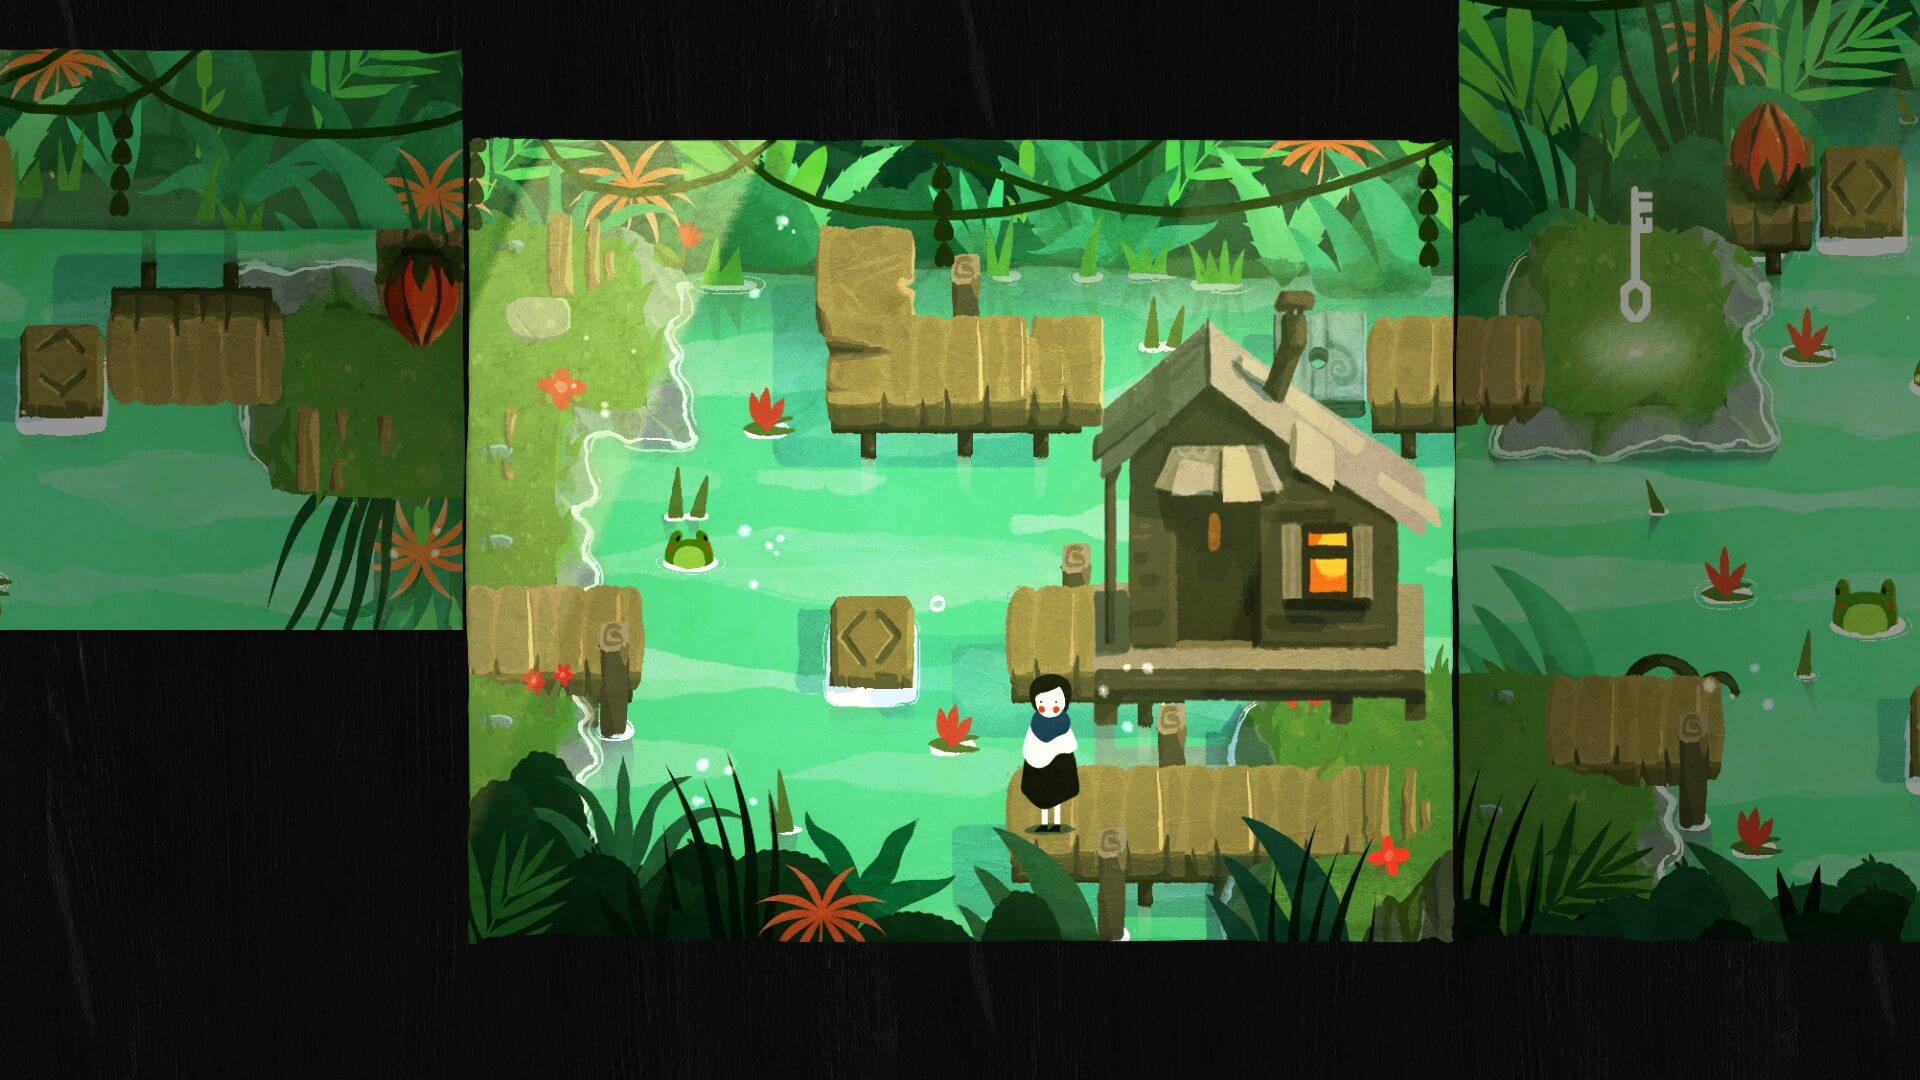 Towards the bottom of the image, Paige, the main characters, stands on a small wooden dock. The green swamp shows a number of possible paths that the player can reach by folding the paper. There is a key on the right side of the image that unlocks the path to the next scene. There is also a dark brown square with arrows on it in the water which can be moved by the player.